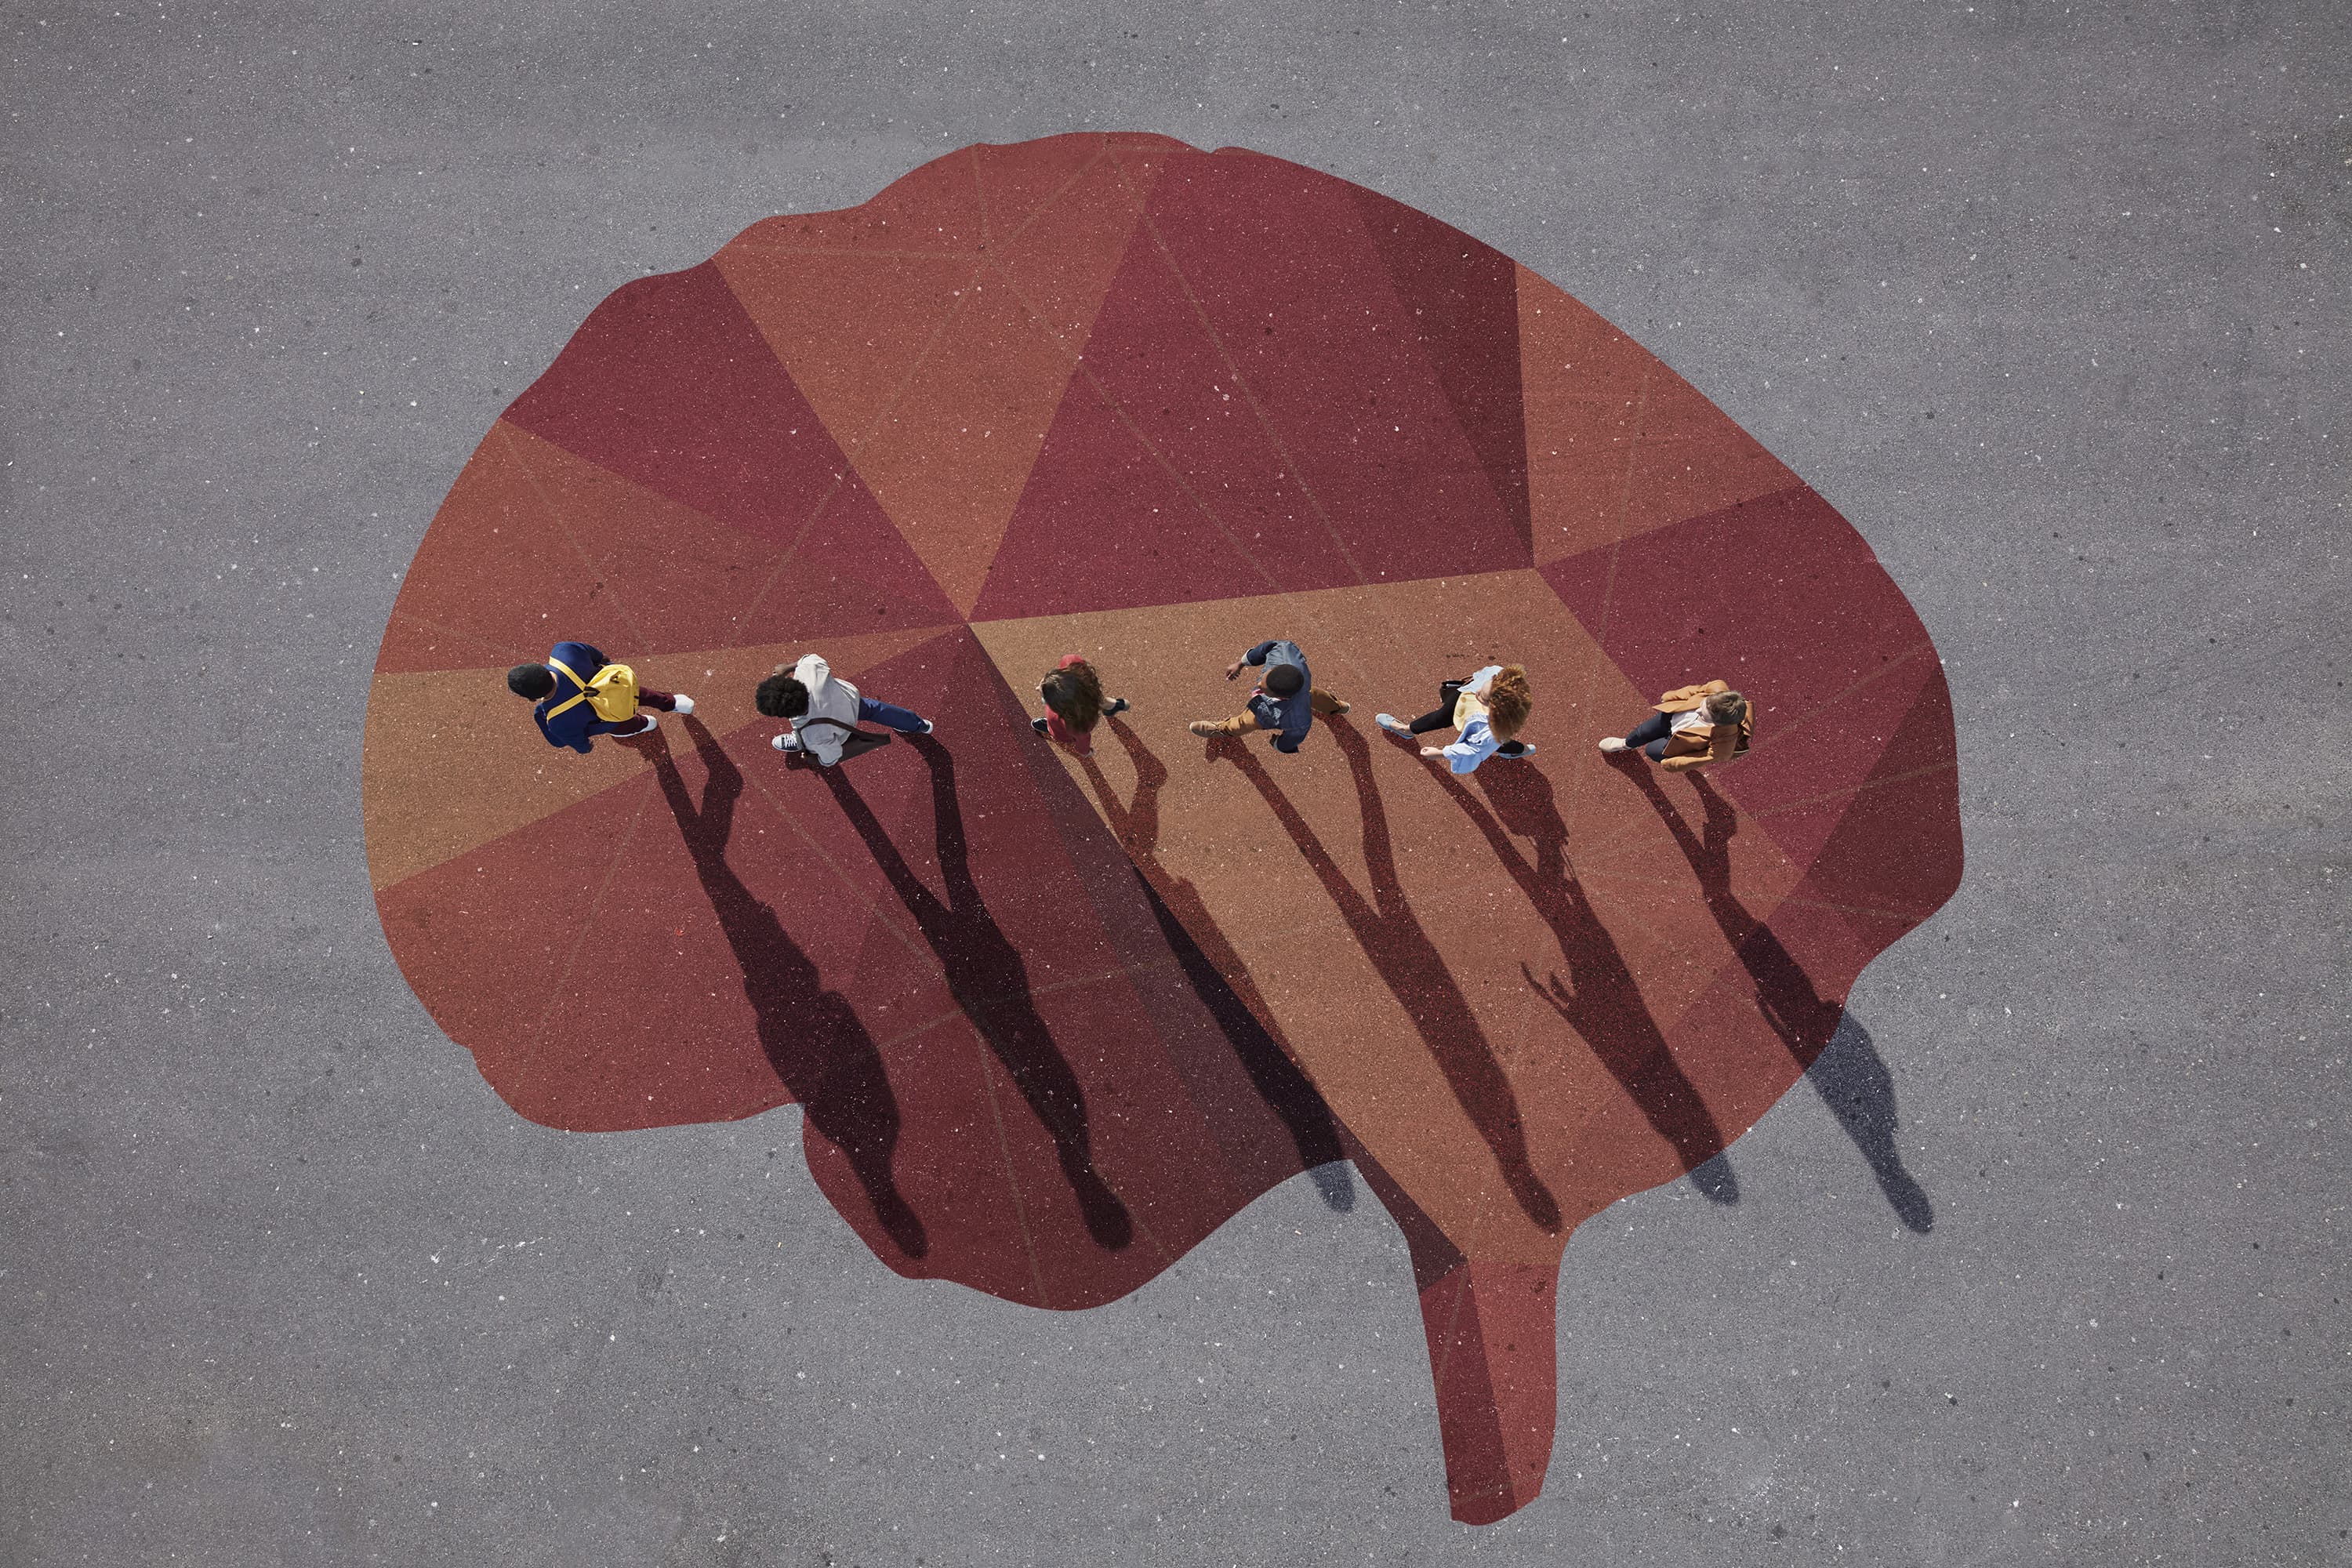 Group of young adults, photographed from above, on various painted tarmac surface, at sunrise. (Klaus Vedfelt/Getty Images)